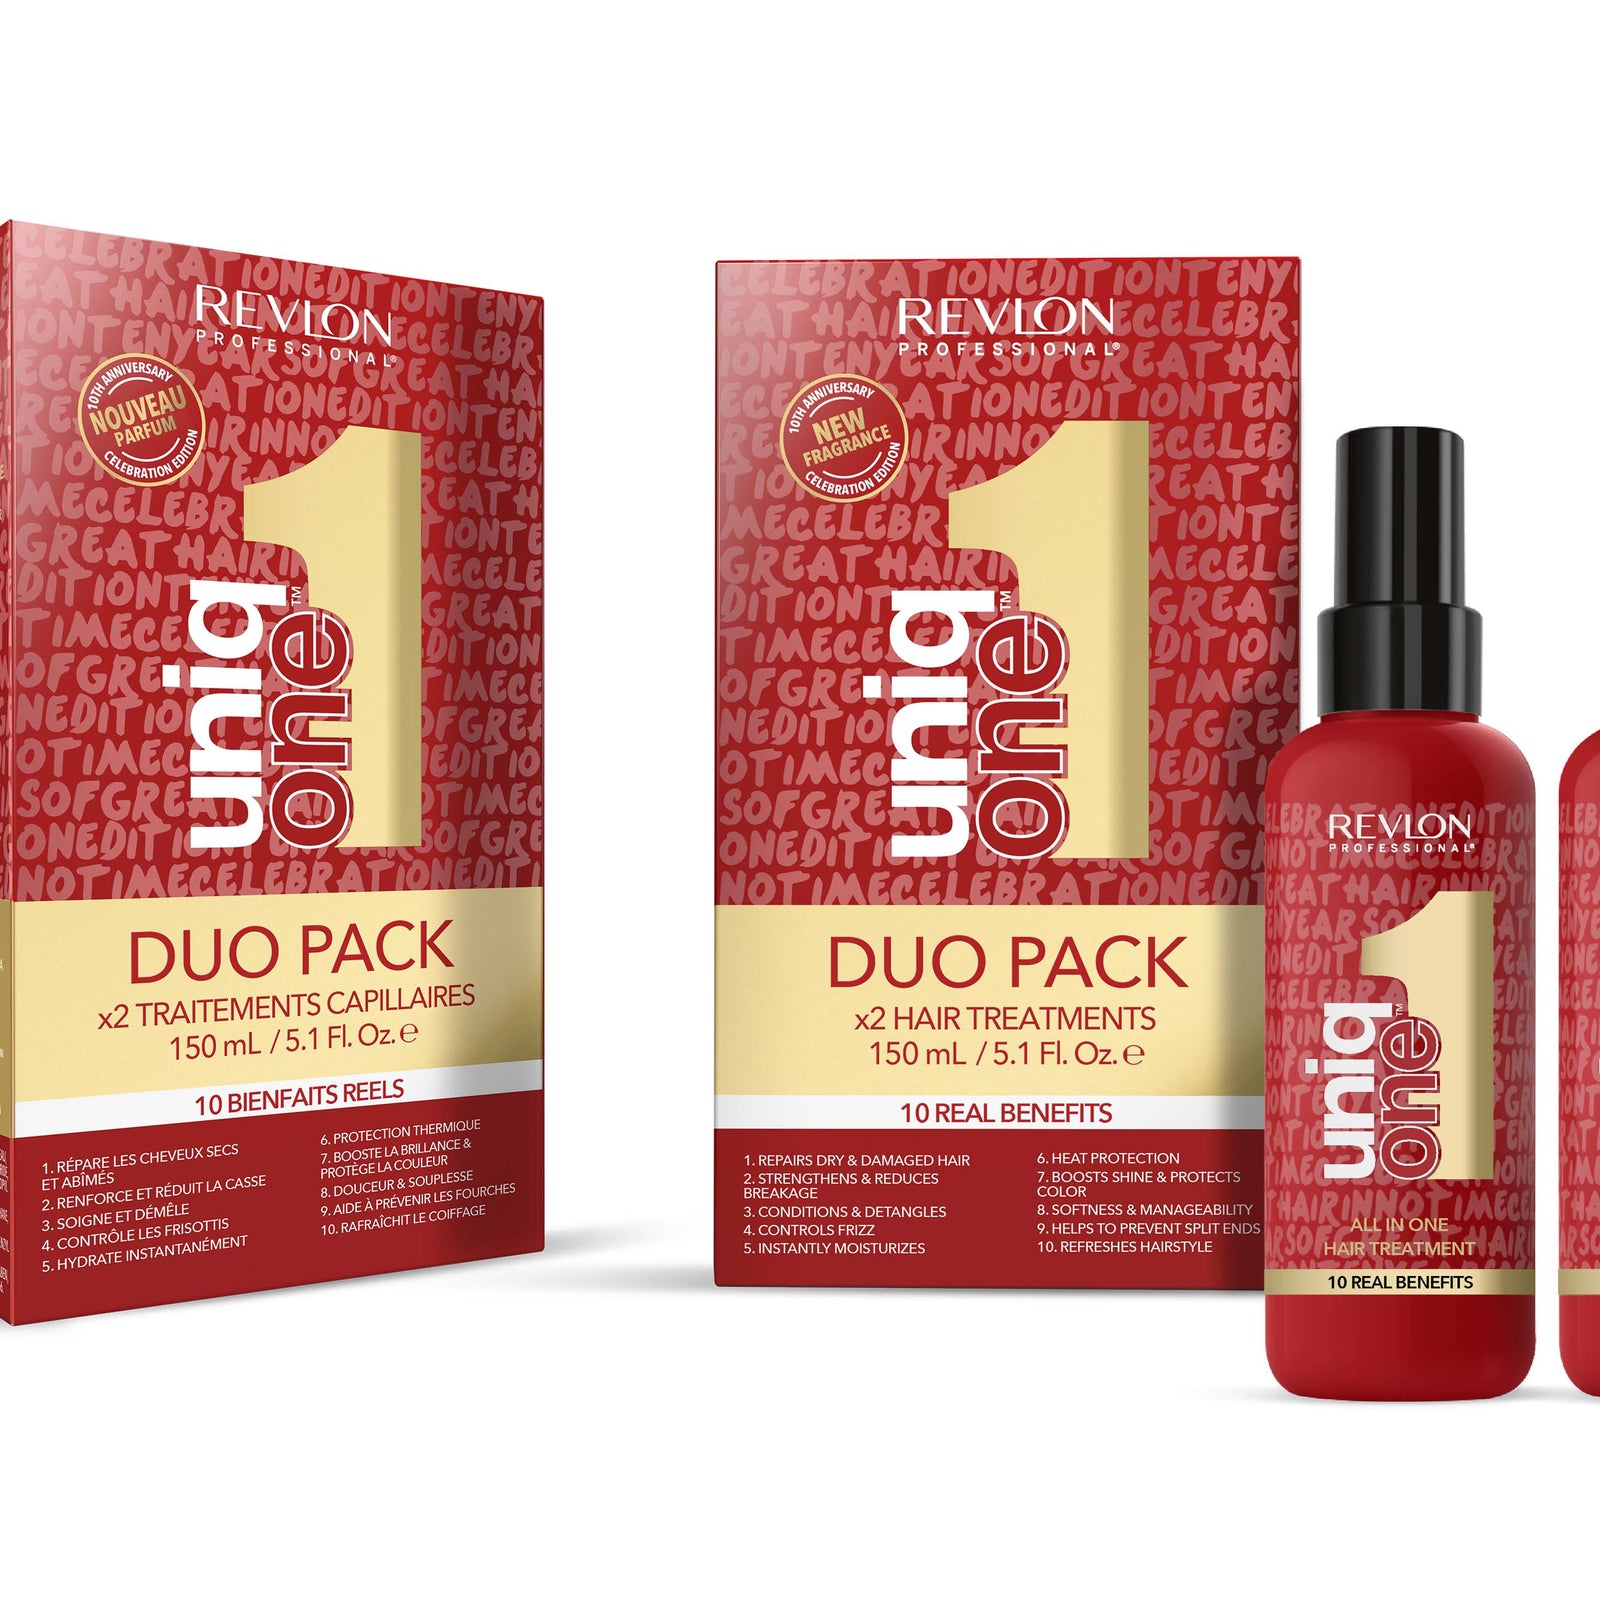 Celebration Leave-In Hair Treatment Duo Pack